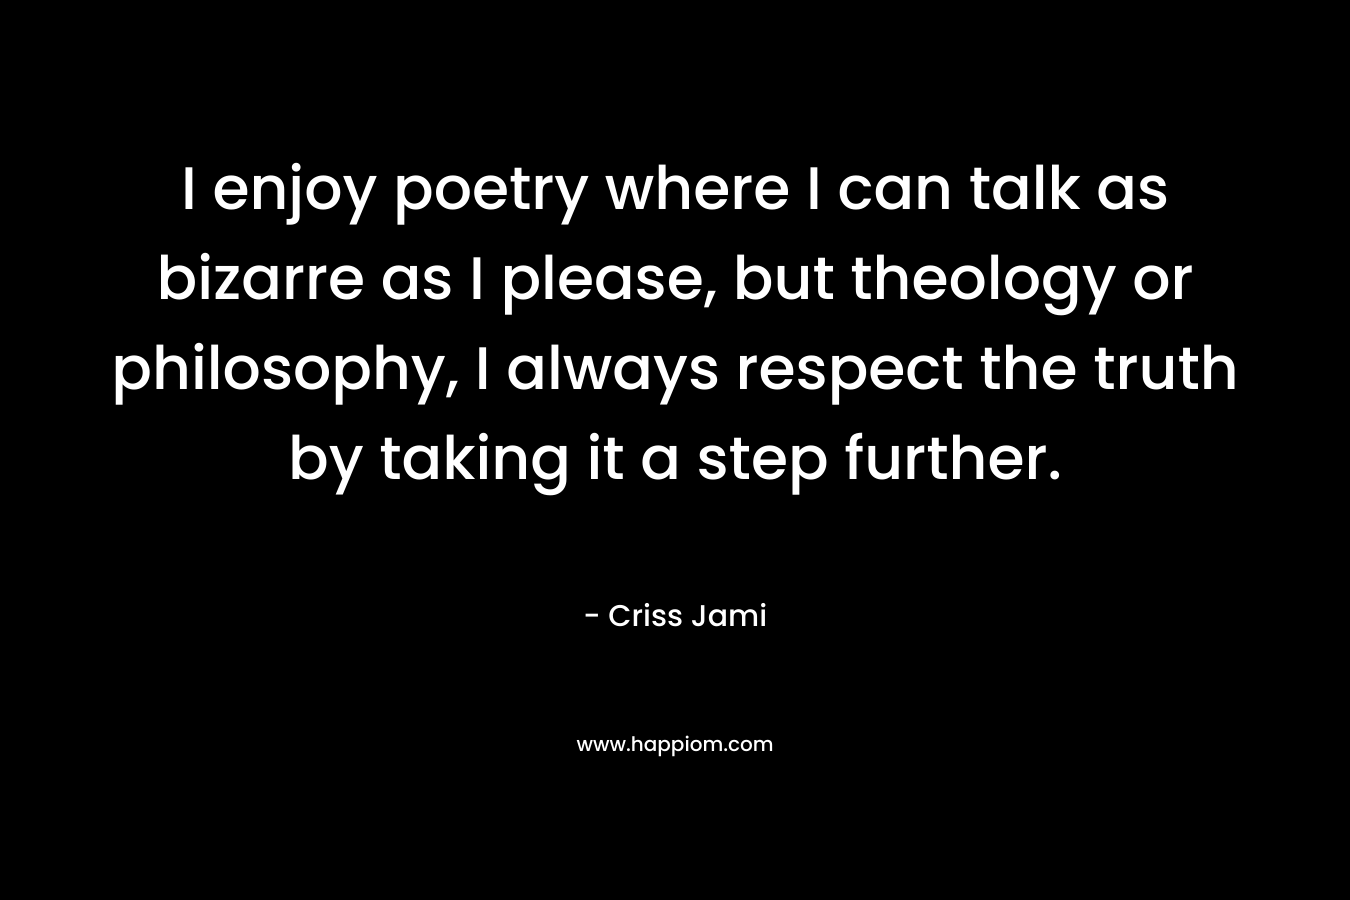 I enjoy poetry where I can talk as bizarre as I please, but theology or philosophy, I always respect the truth by taking it a step further.